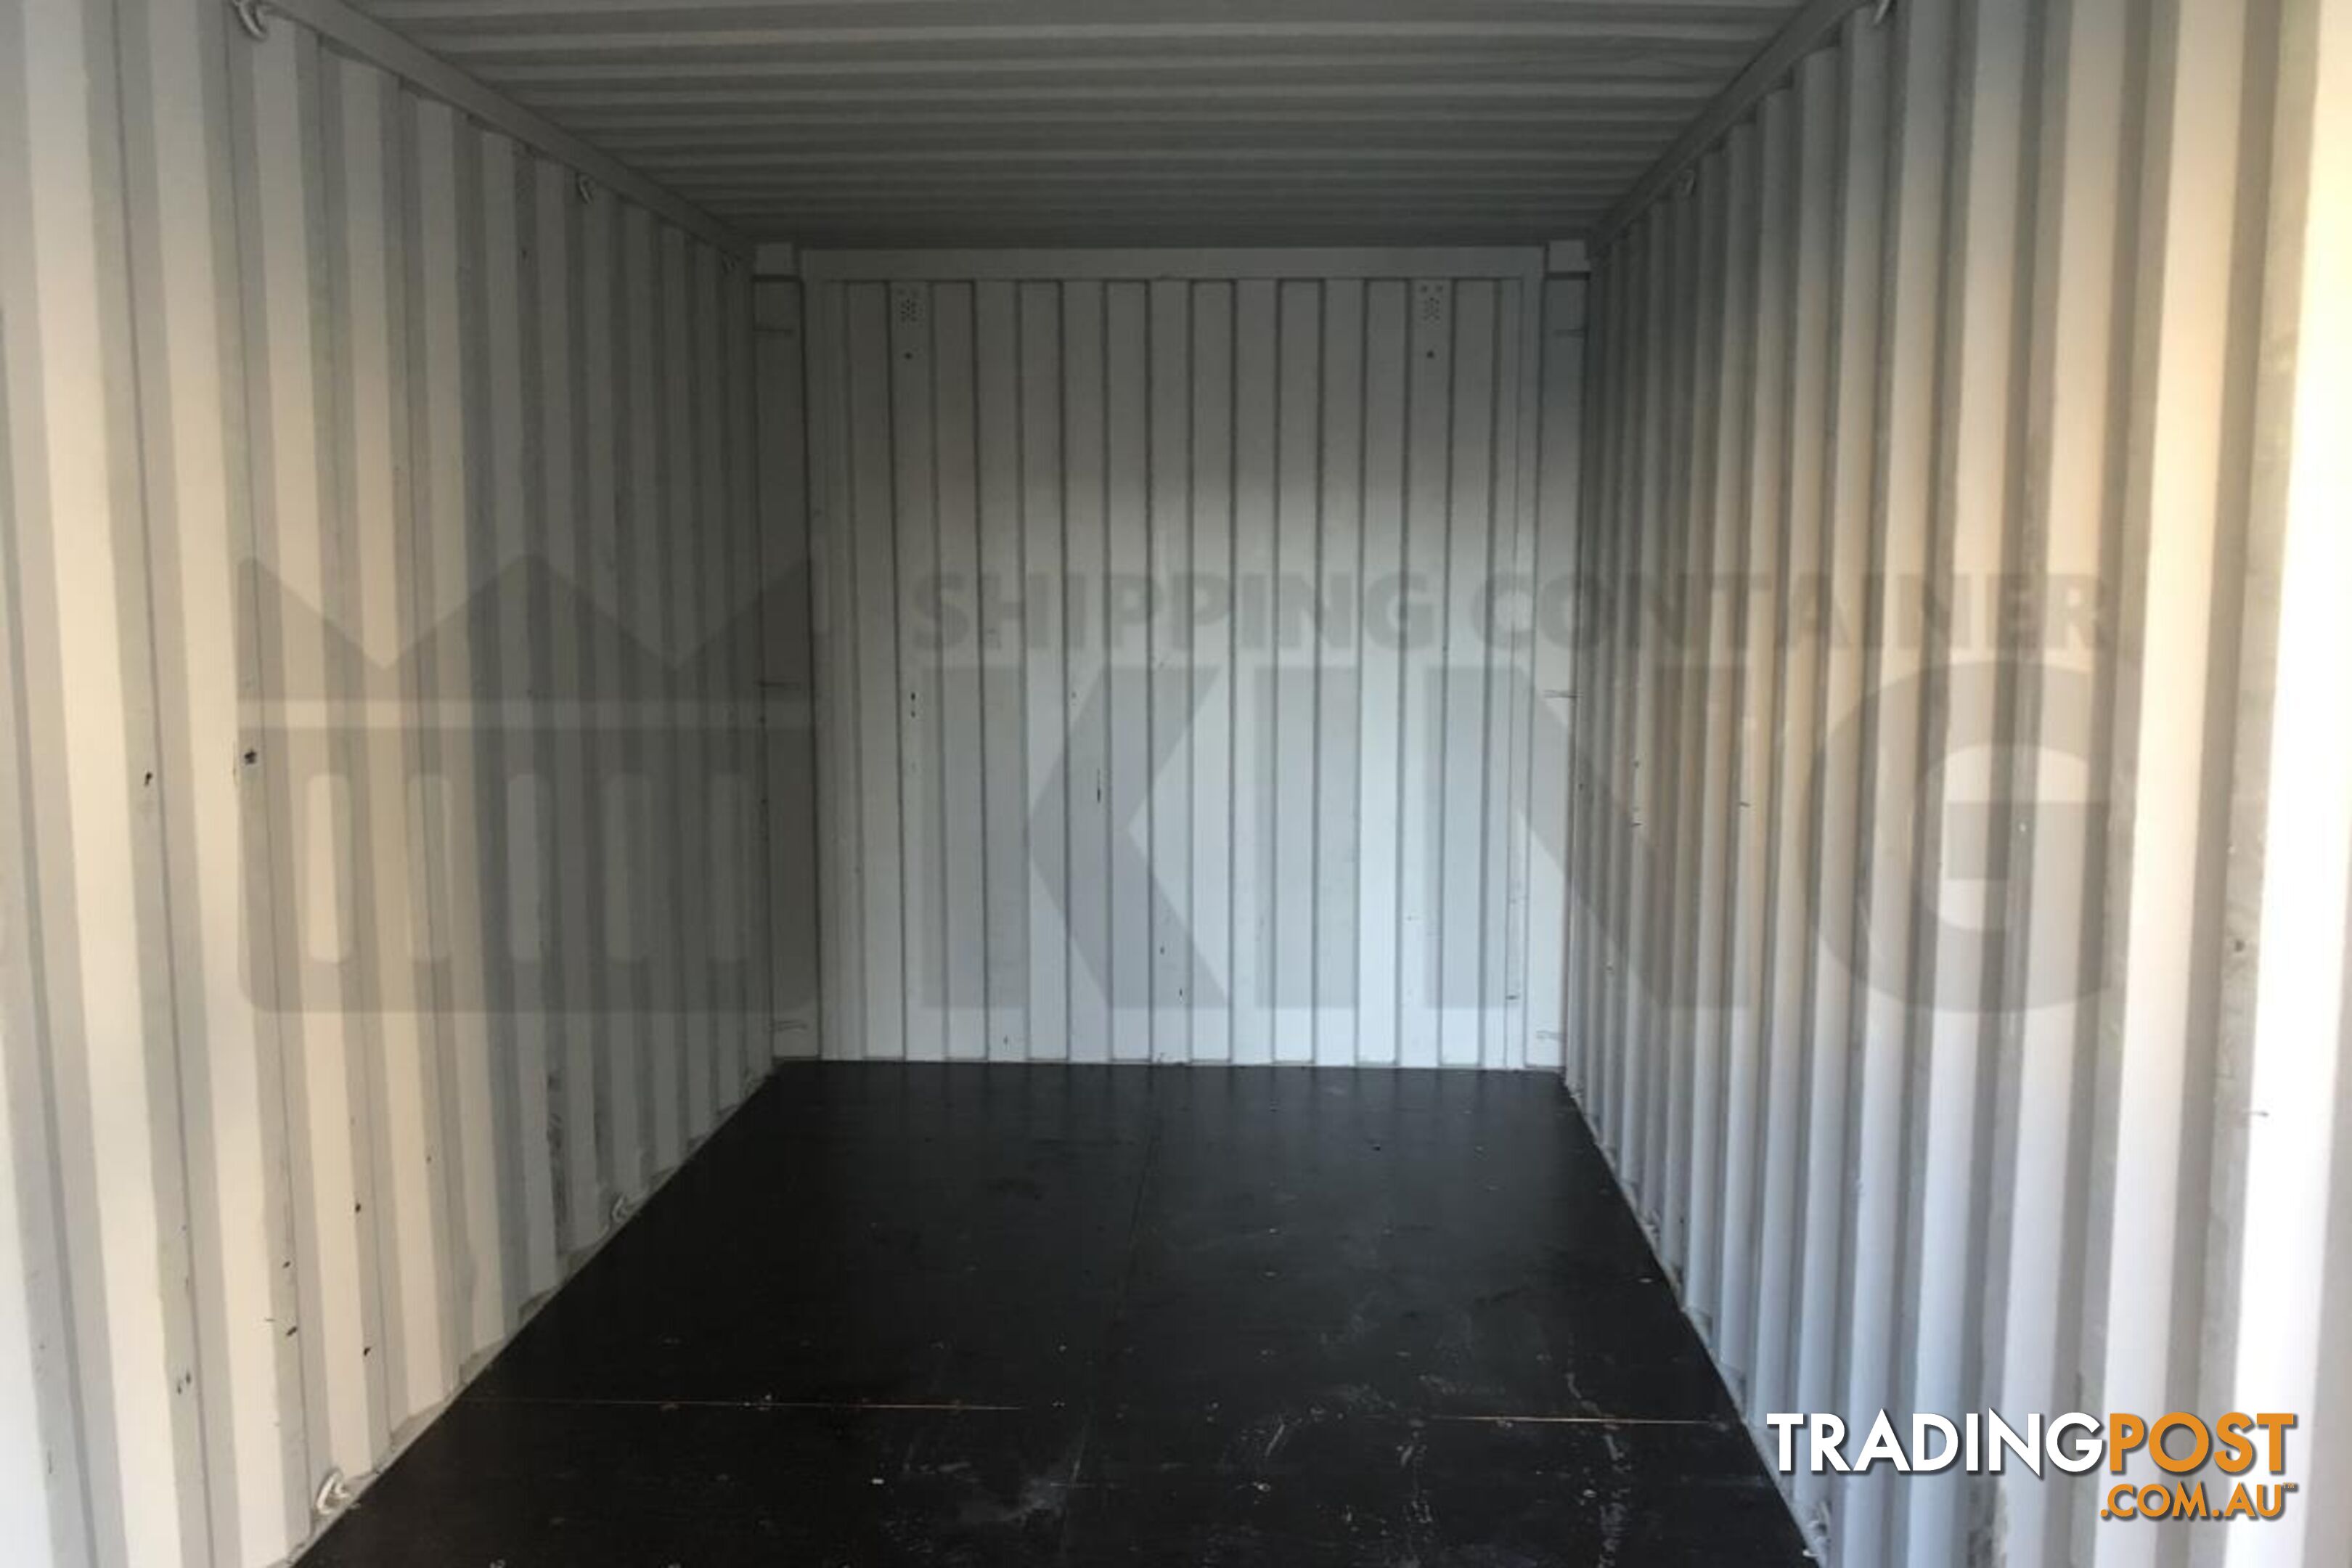 20' SHIPPING CONTAINER OFFICE "BUDGET BARRY" (BUDGET) - in Gympie